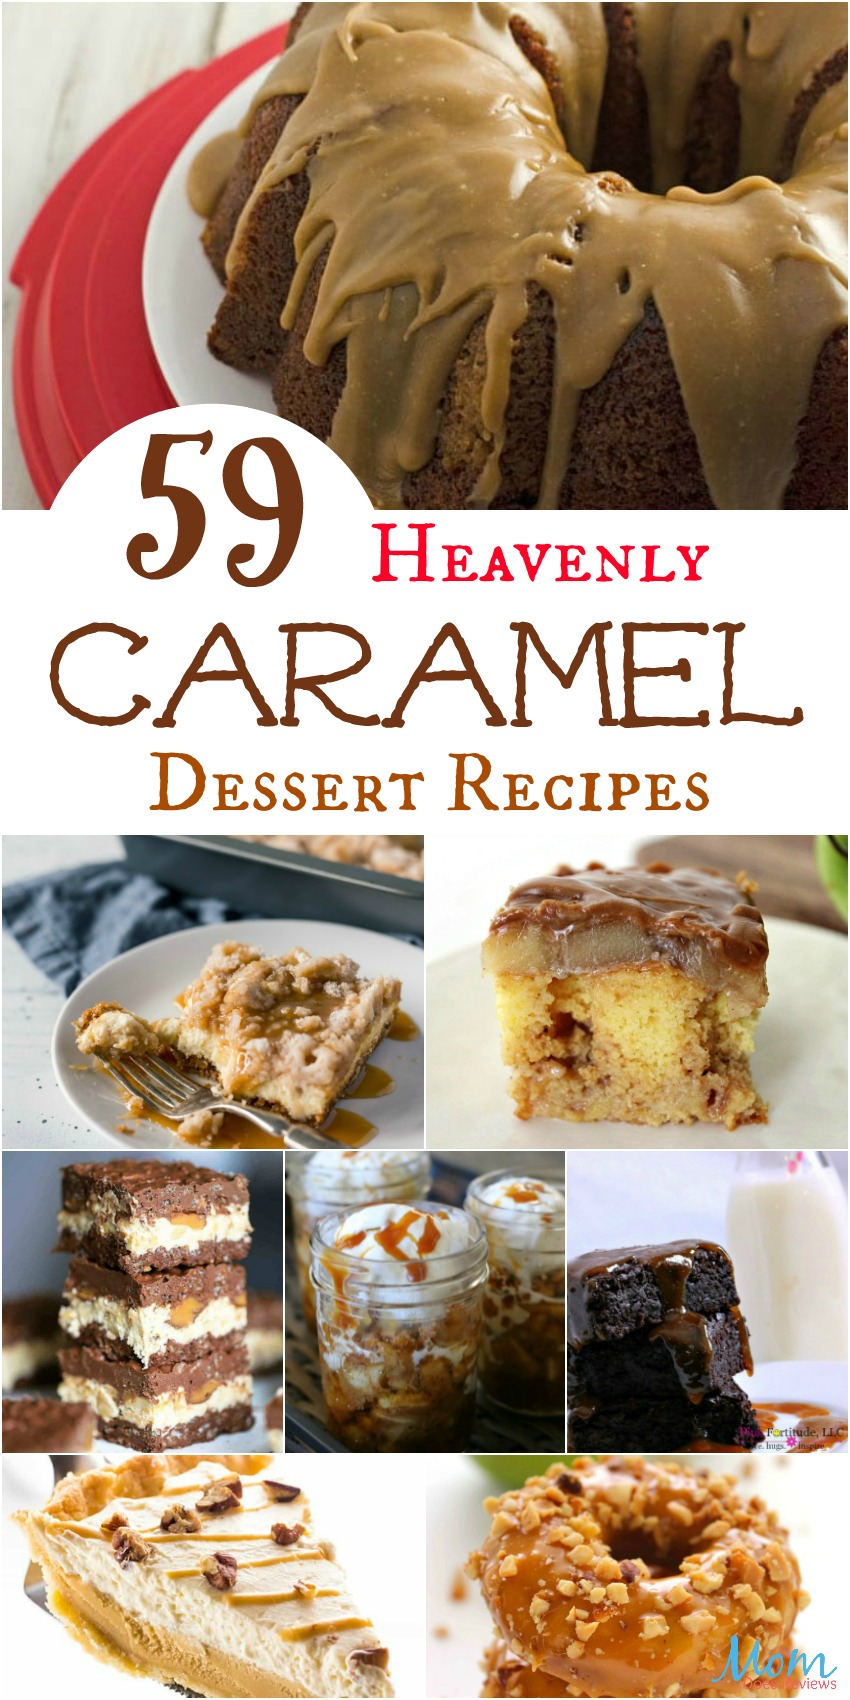 59 Heavenly Caramel Dessert Recipes Your Family Will Love #desserts #caramel #foodie #sweettreats